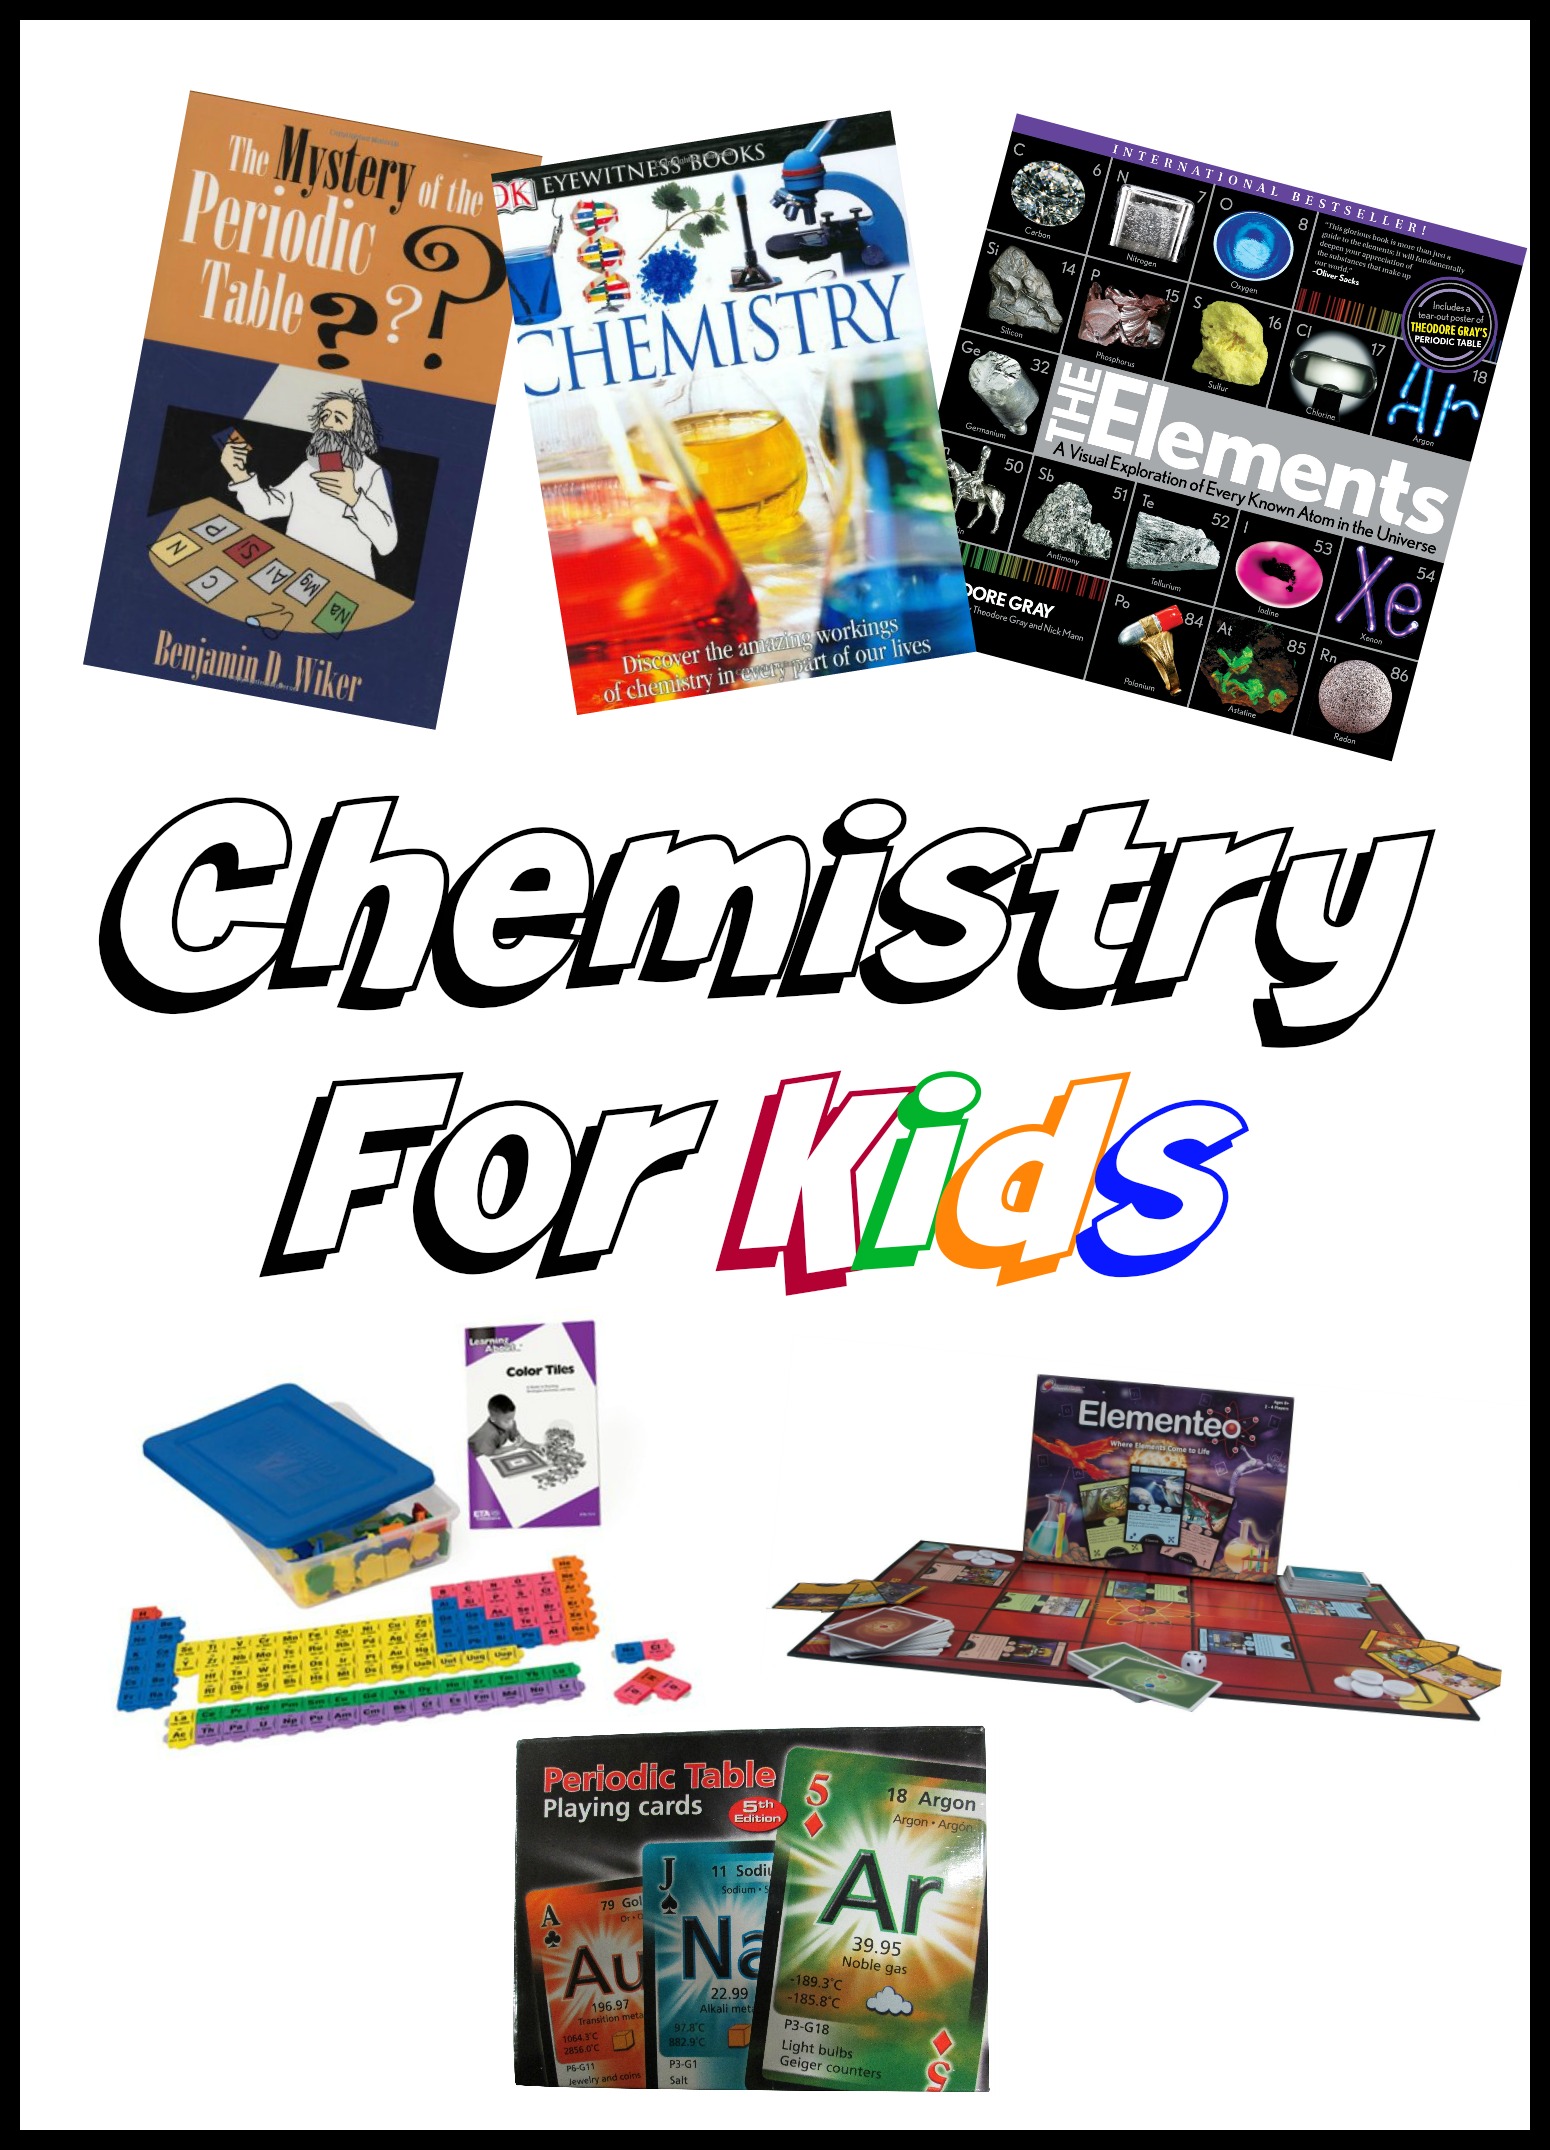 Super Chem 120 Chemistry Set Science Activities Homeschool Activity Learn Home 